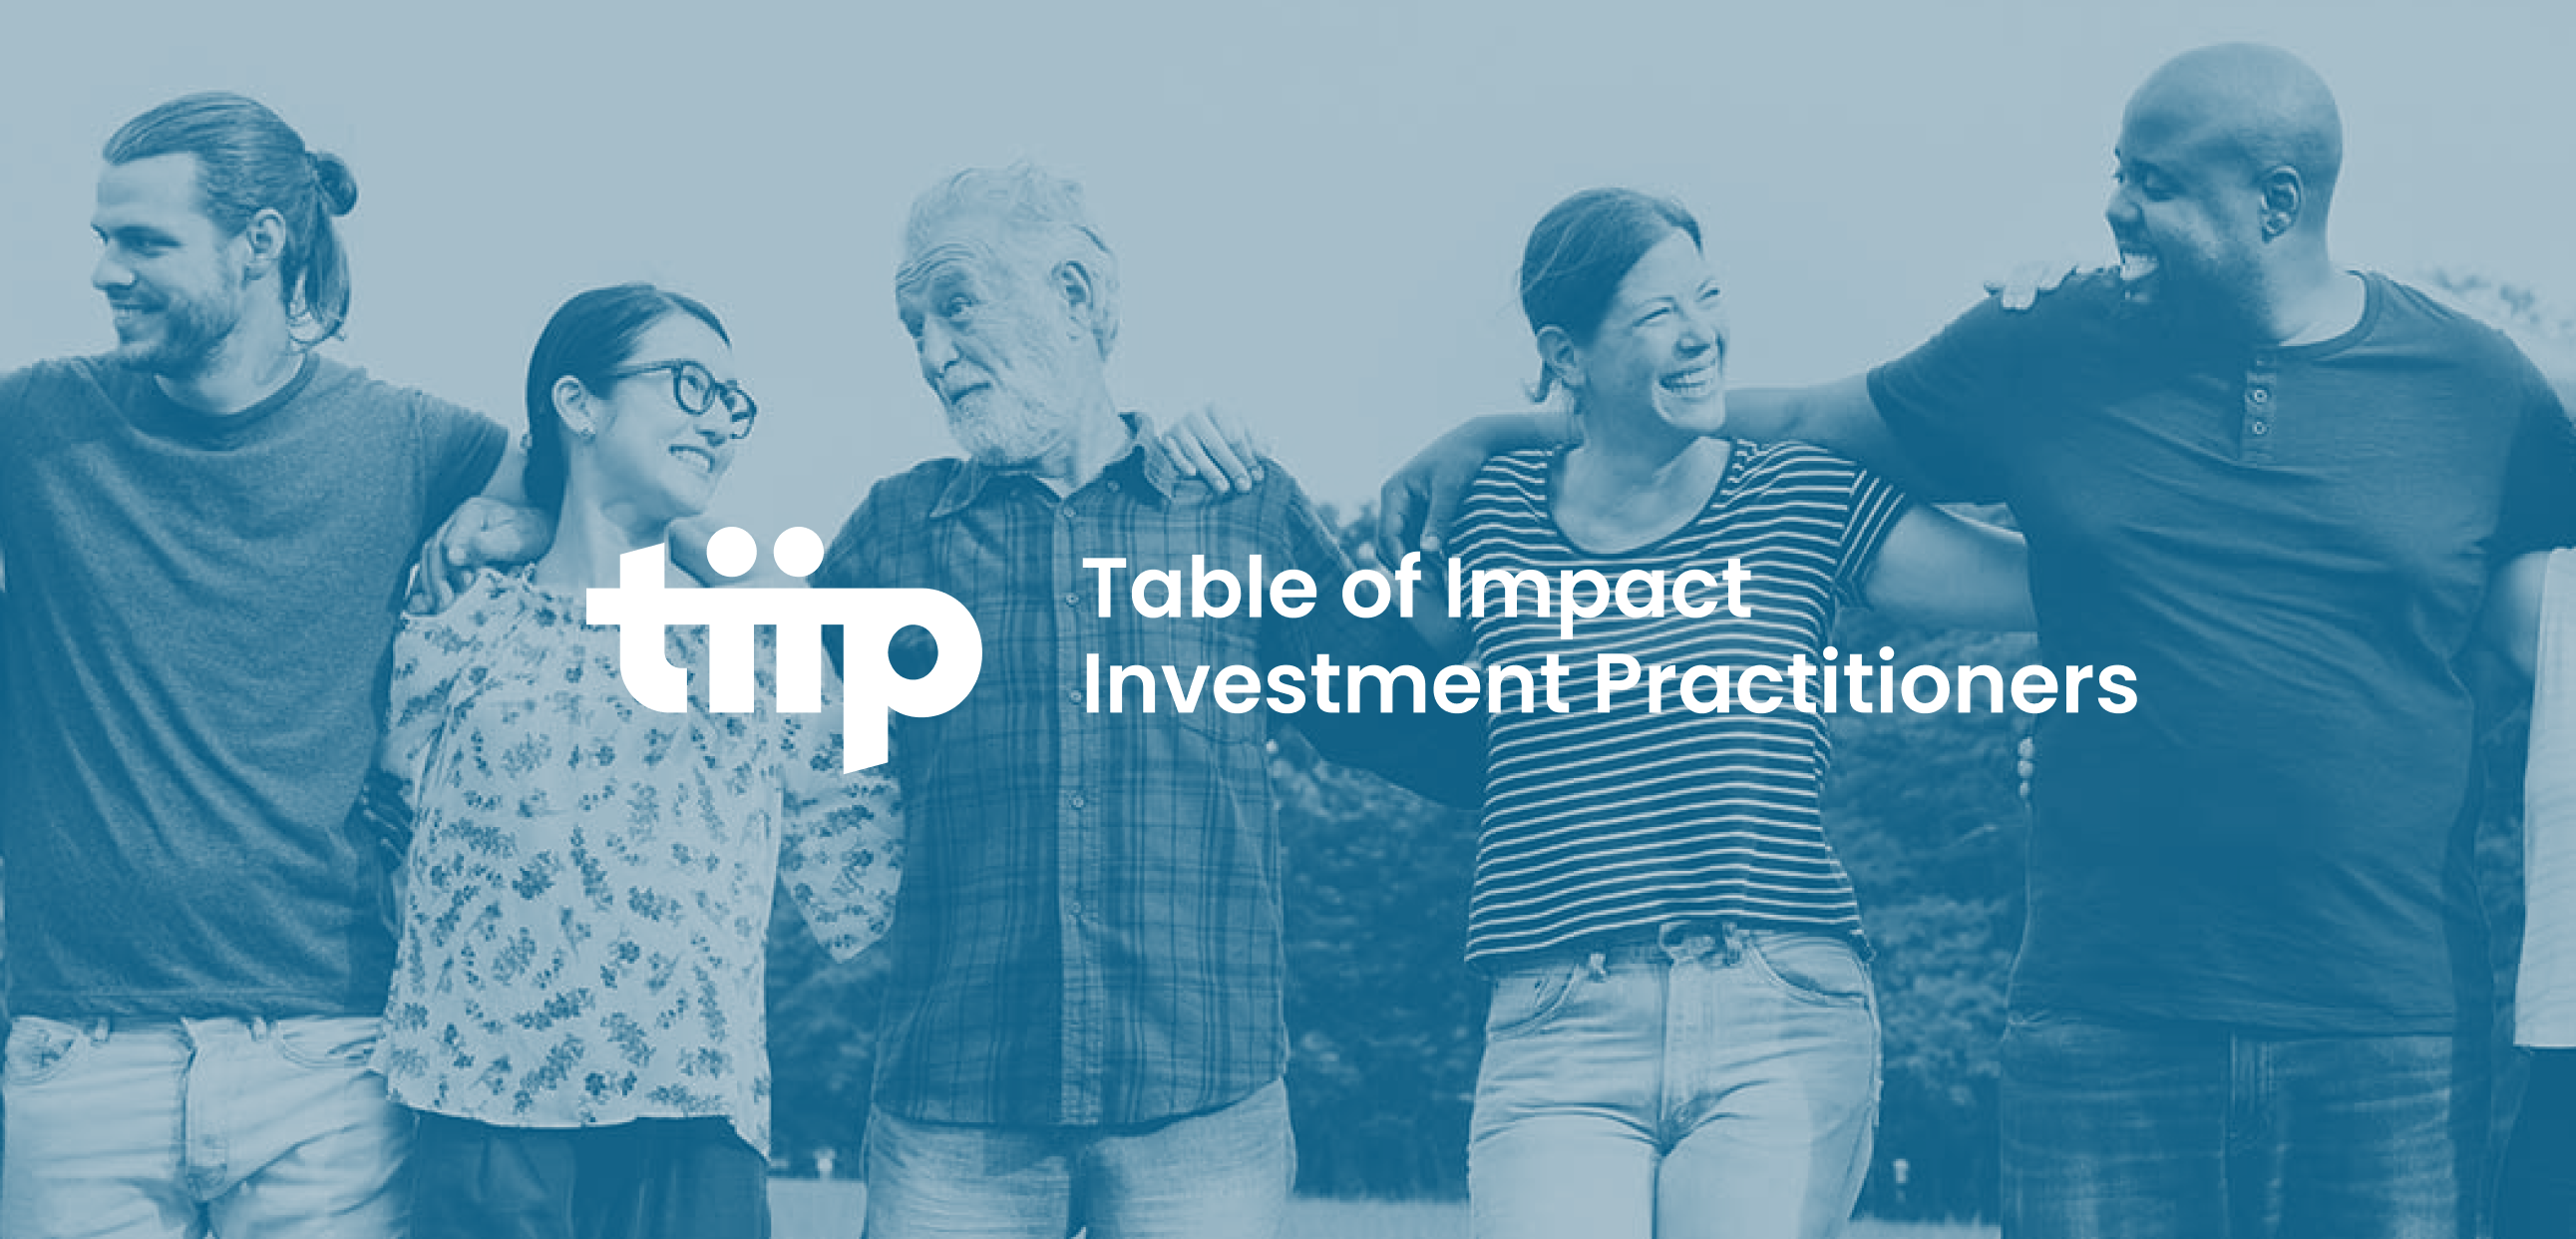 TIIP: Table of Impact Investment Practitioners